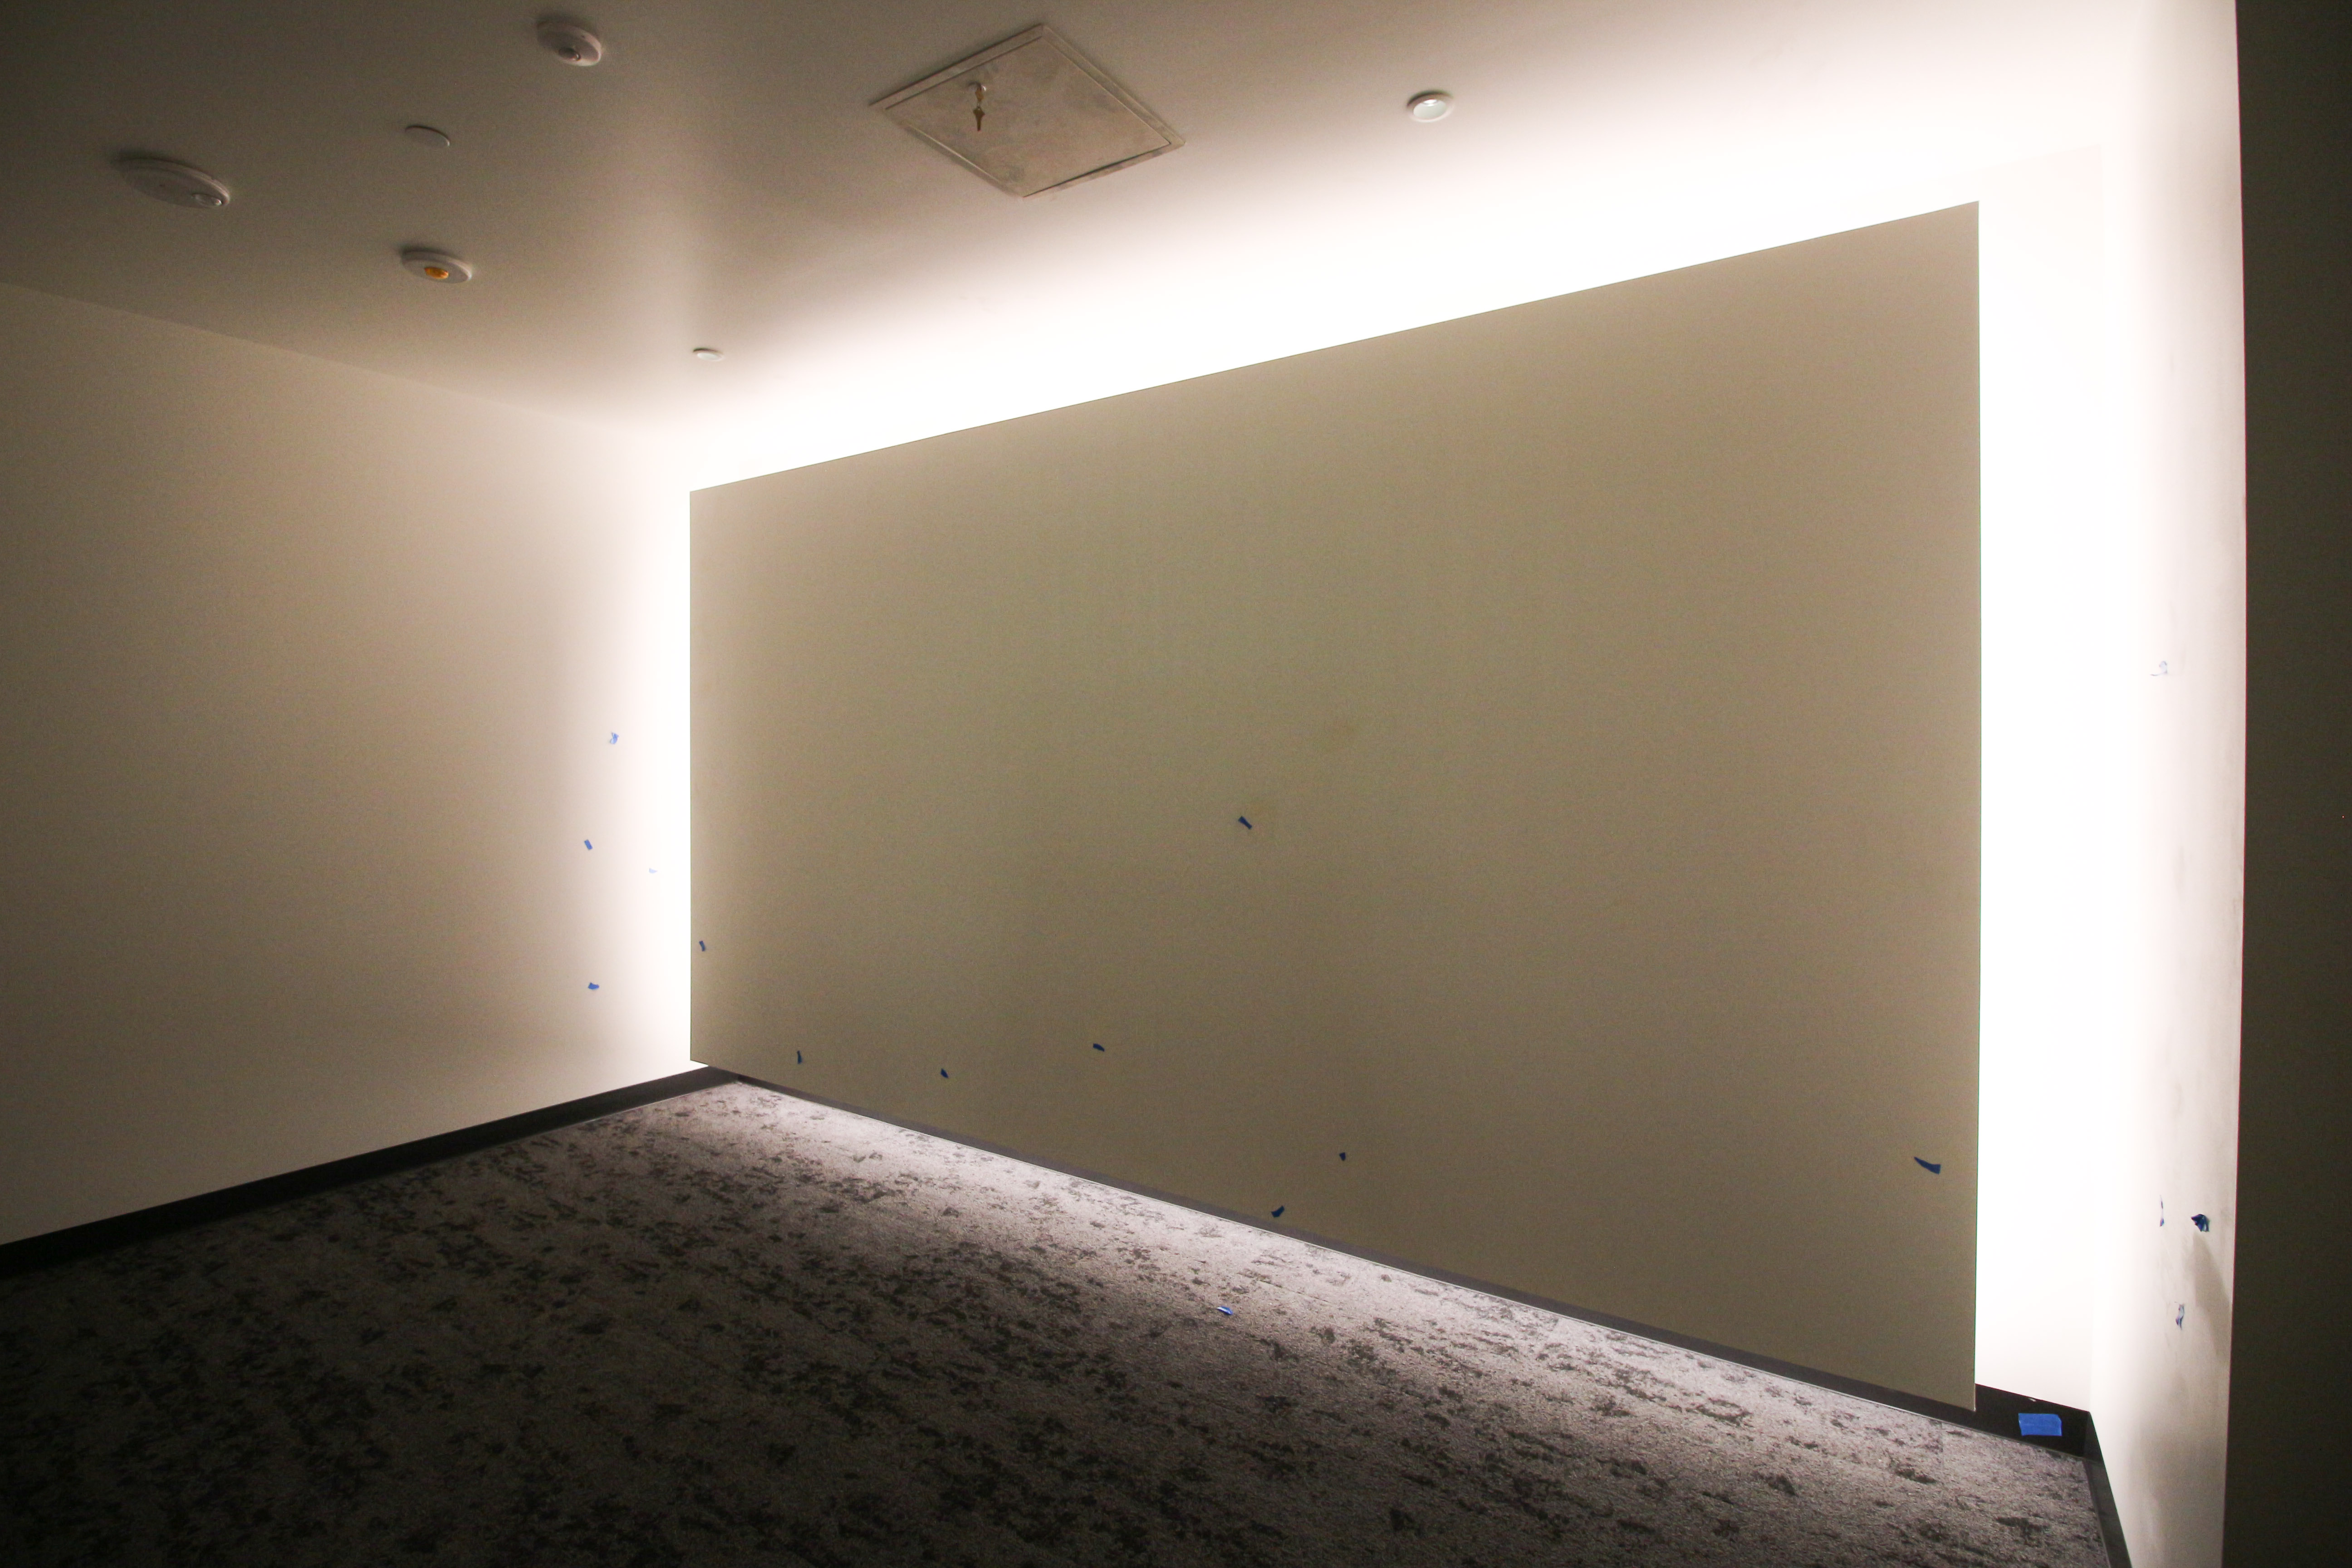 "Reflection room" with white light emitting from behind a wall